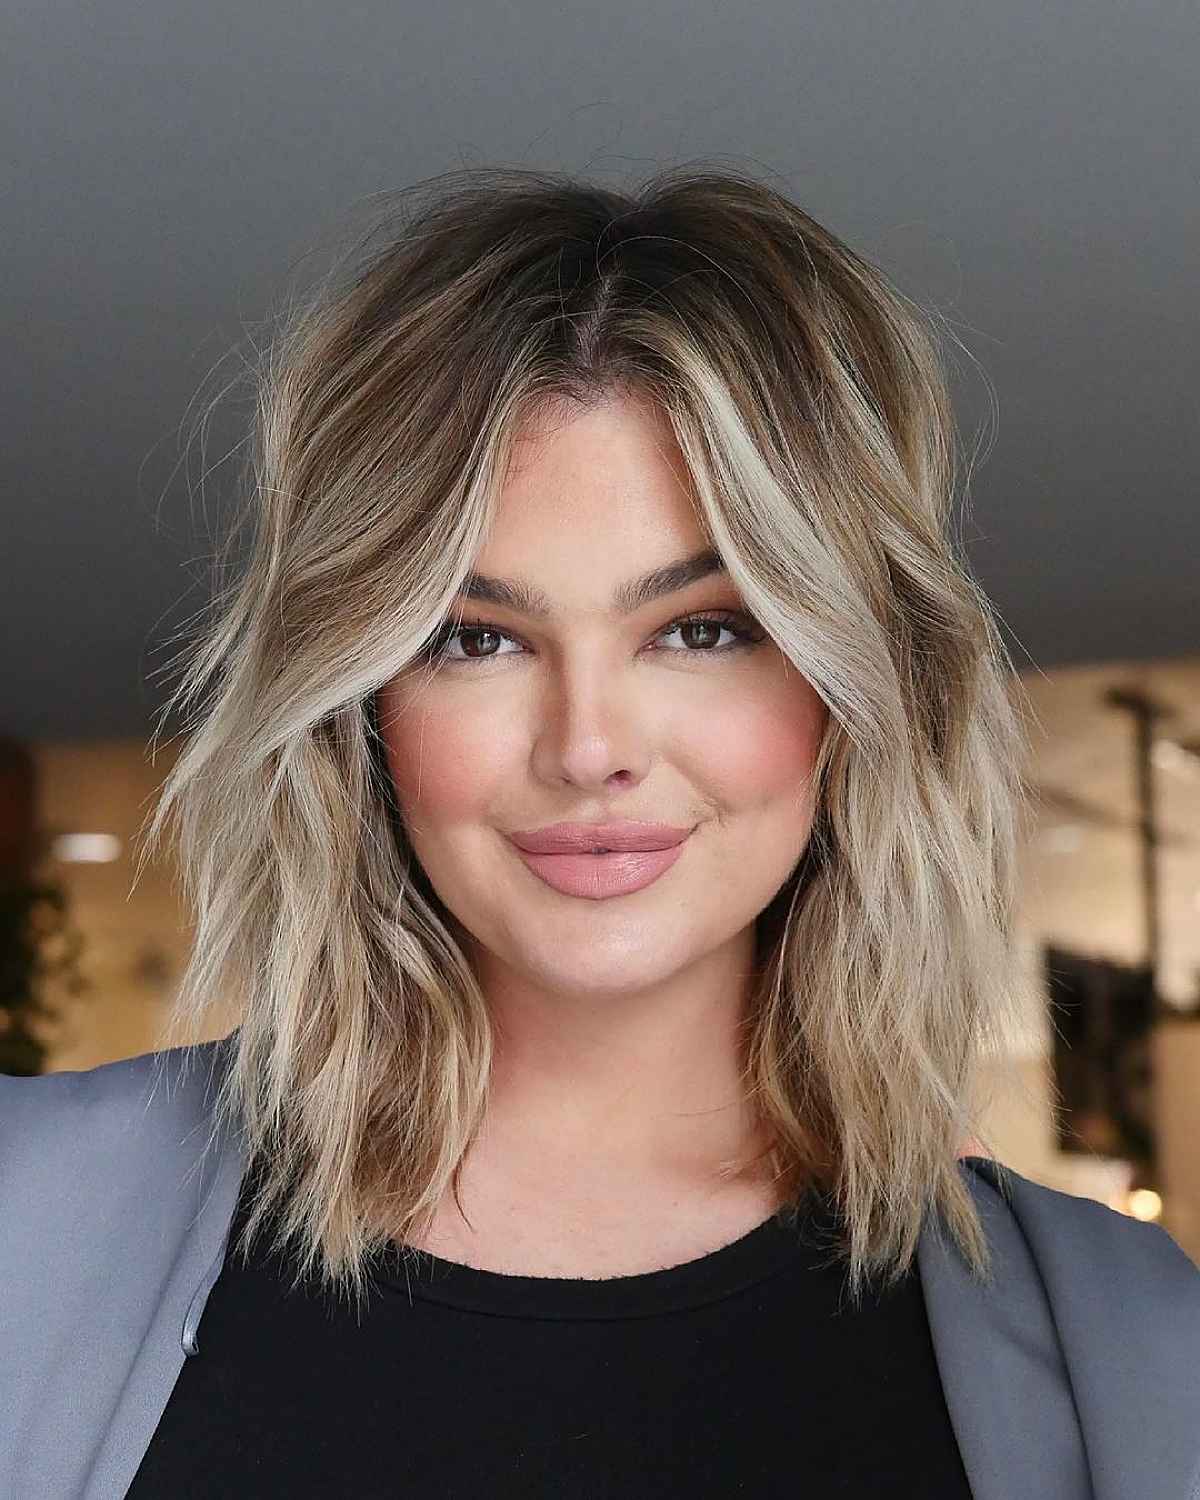 26 Most Requested Shoulder-Length Choppy Haircuts for a Trendy Look